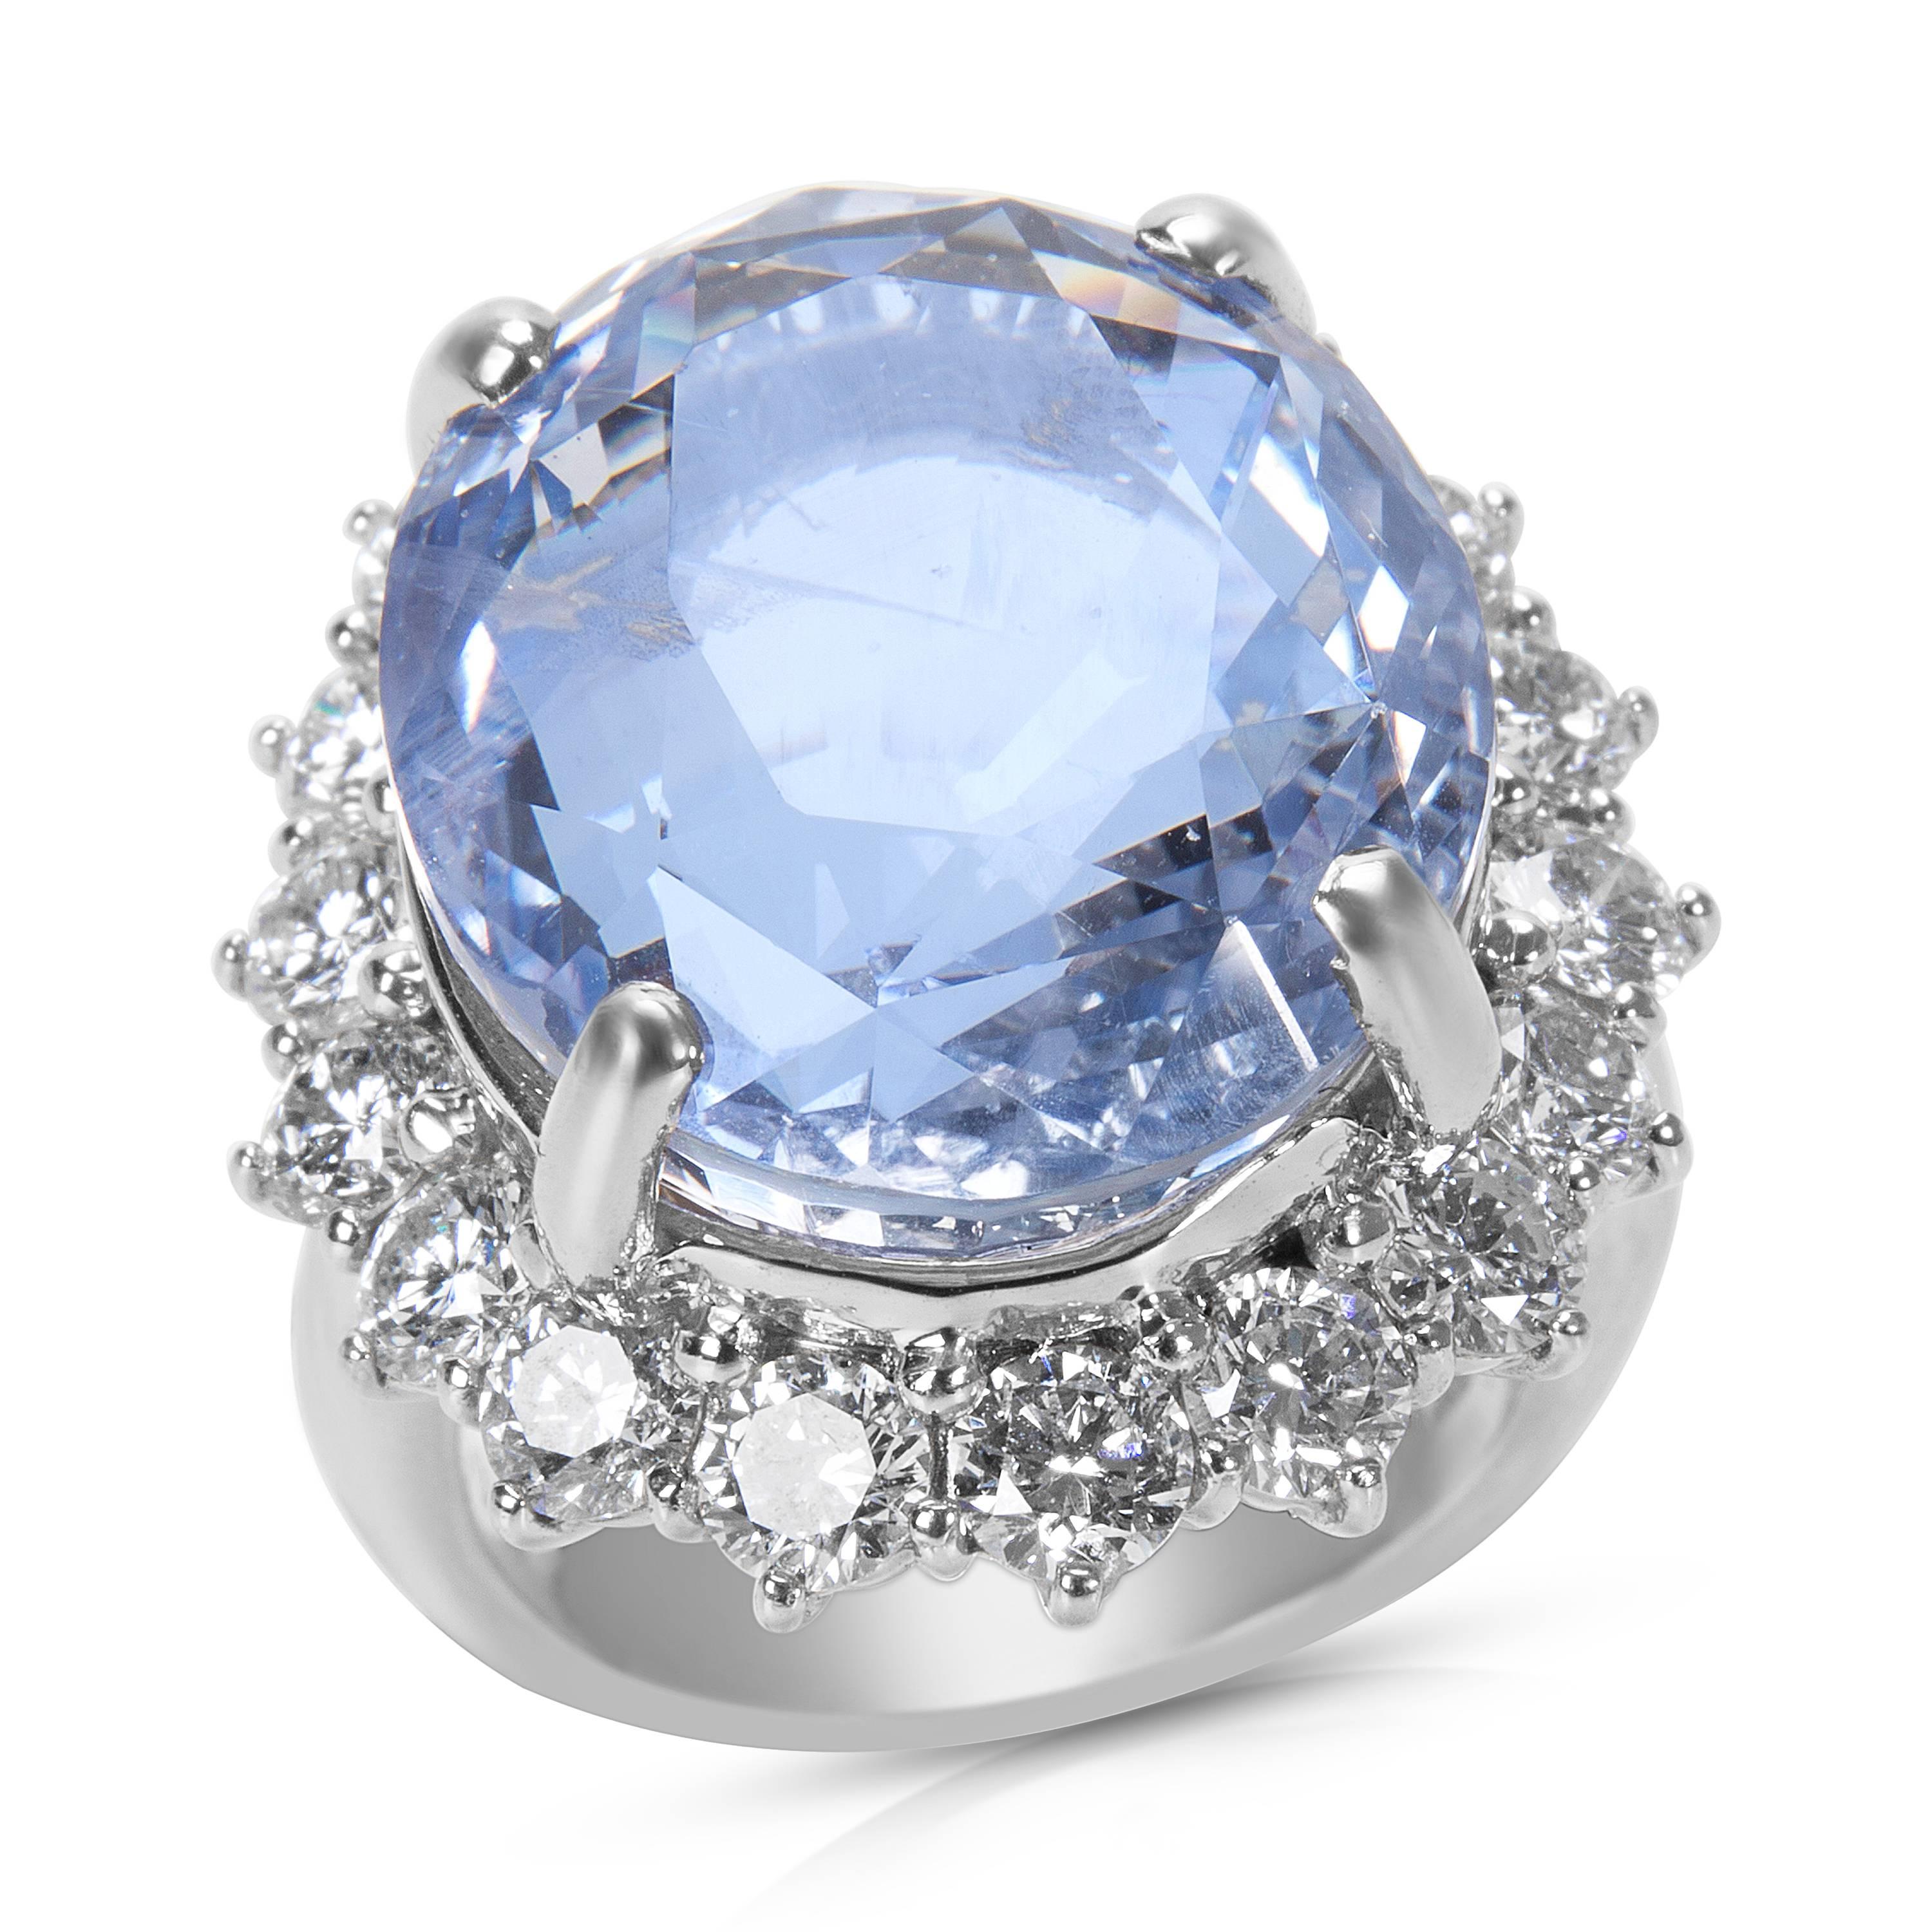 With a stunning 25.60 carat light blue Ceylon, oval shaped sapphire at its center, this ring is not only elegant, but regal. Surrounding the sapphire are 2.60 carats of diamonds. Ring Size is 6.25.

This ring is brand new and unworn. It comes with